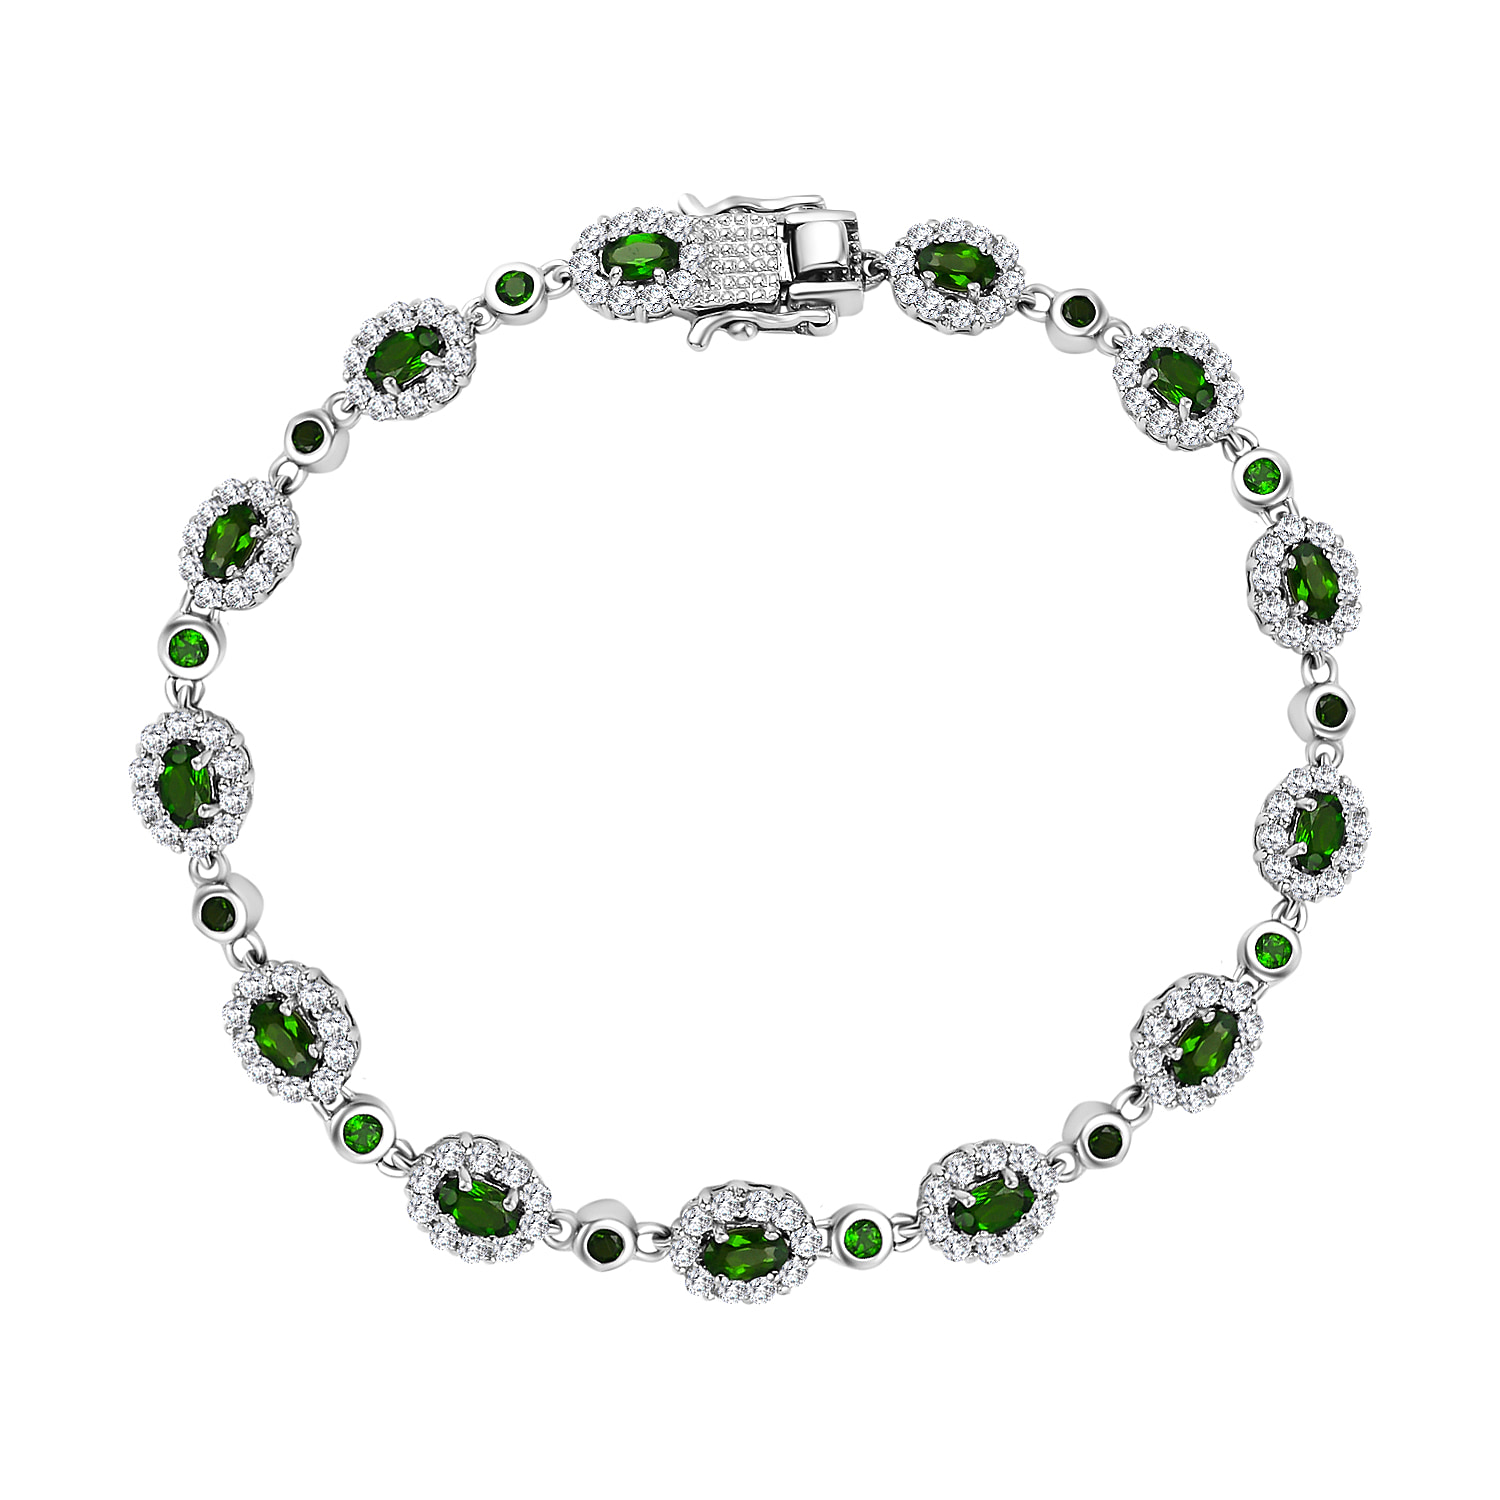 Purchased this 6.52ct diamond tennis bracelet and I adore it